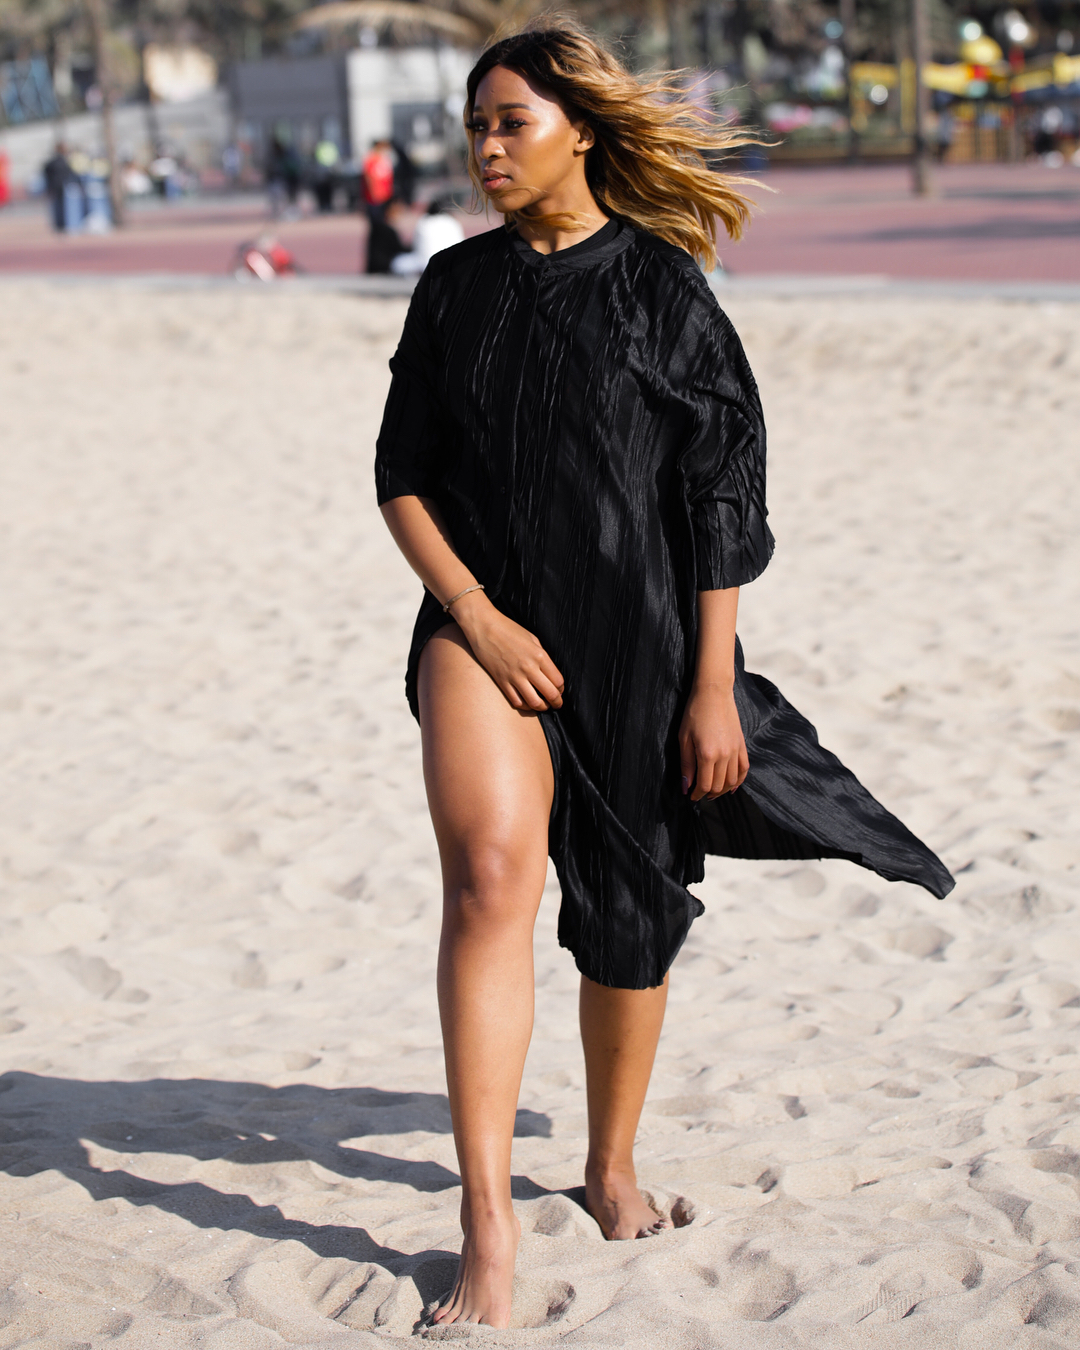 Sbahle Mpisane at the Beach